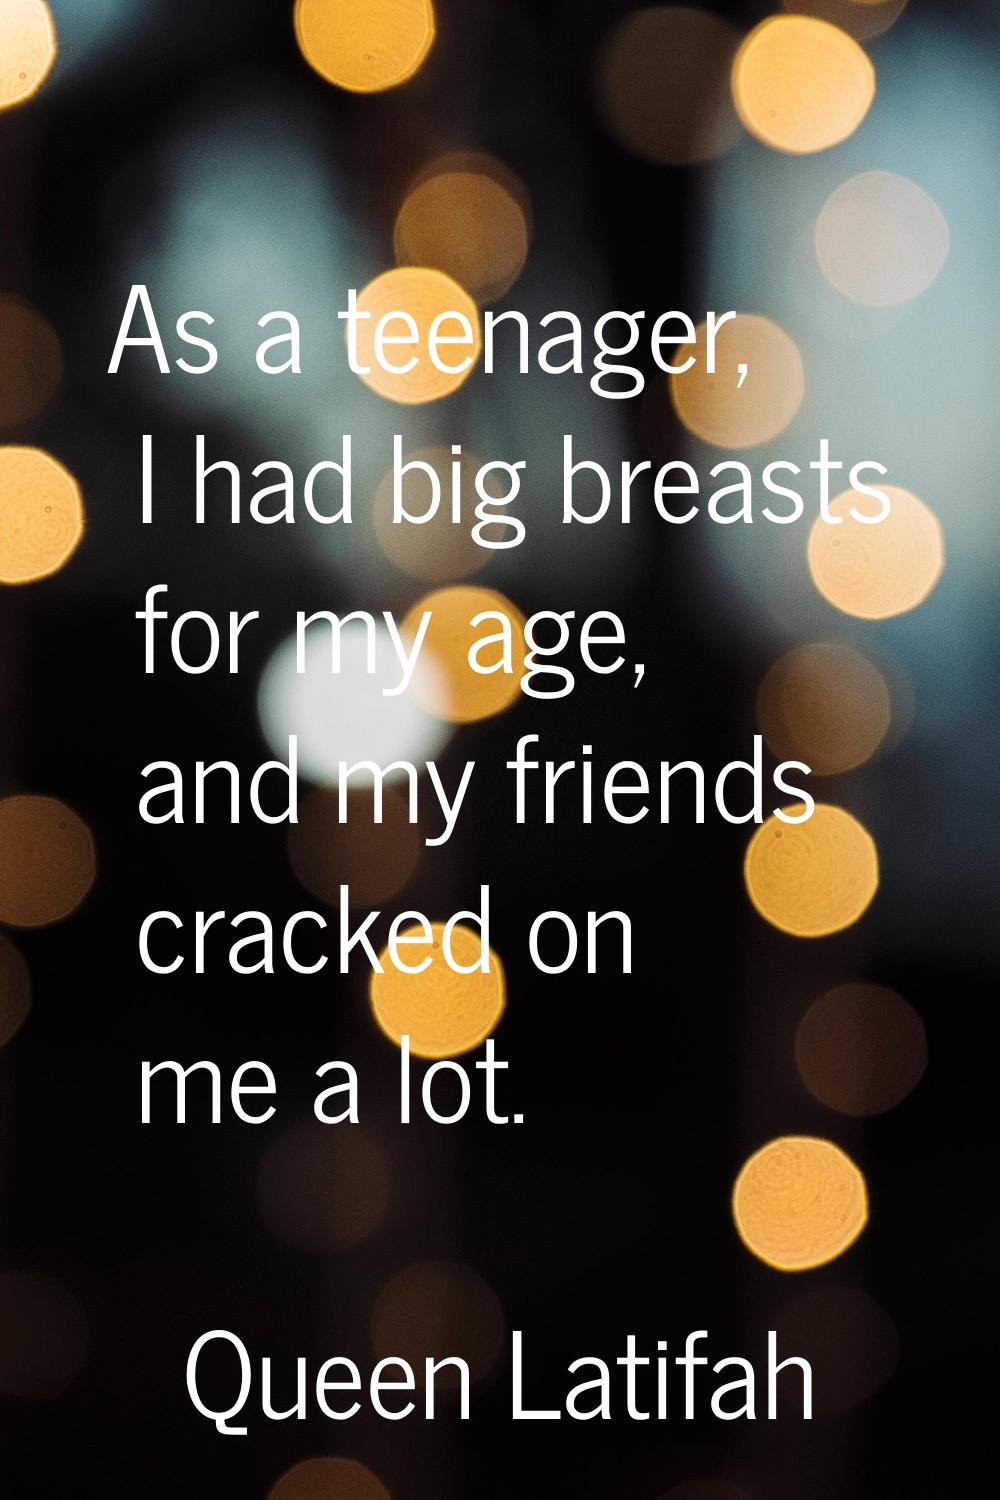 As a teenager, I had big breasts for my age, and my friends cracked on me a lot.